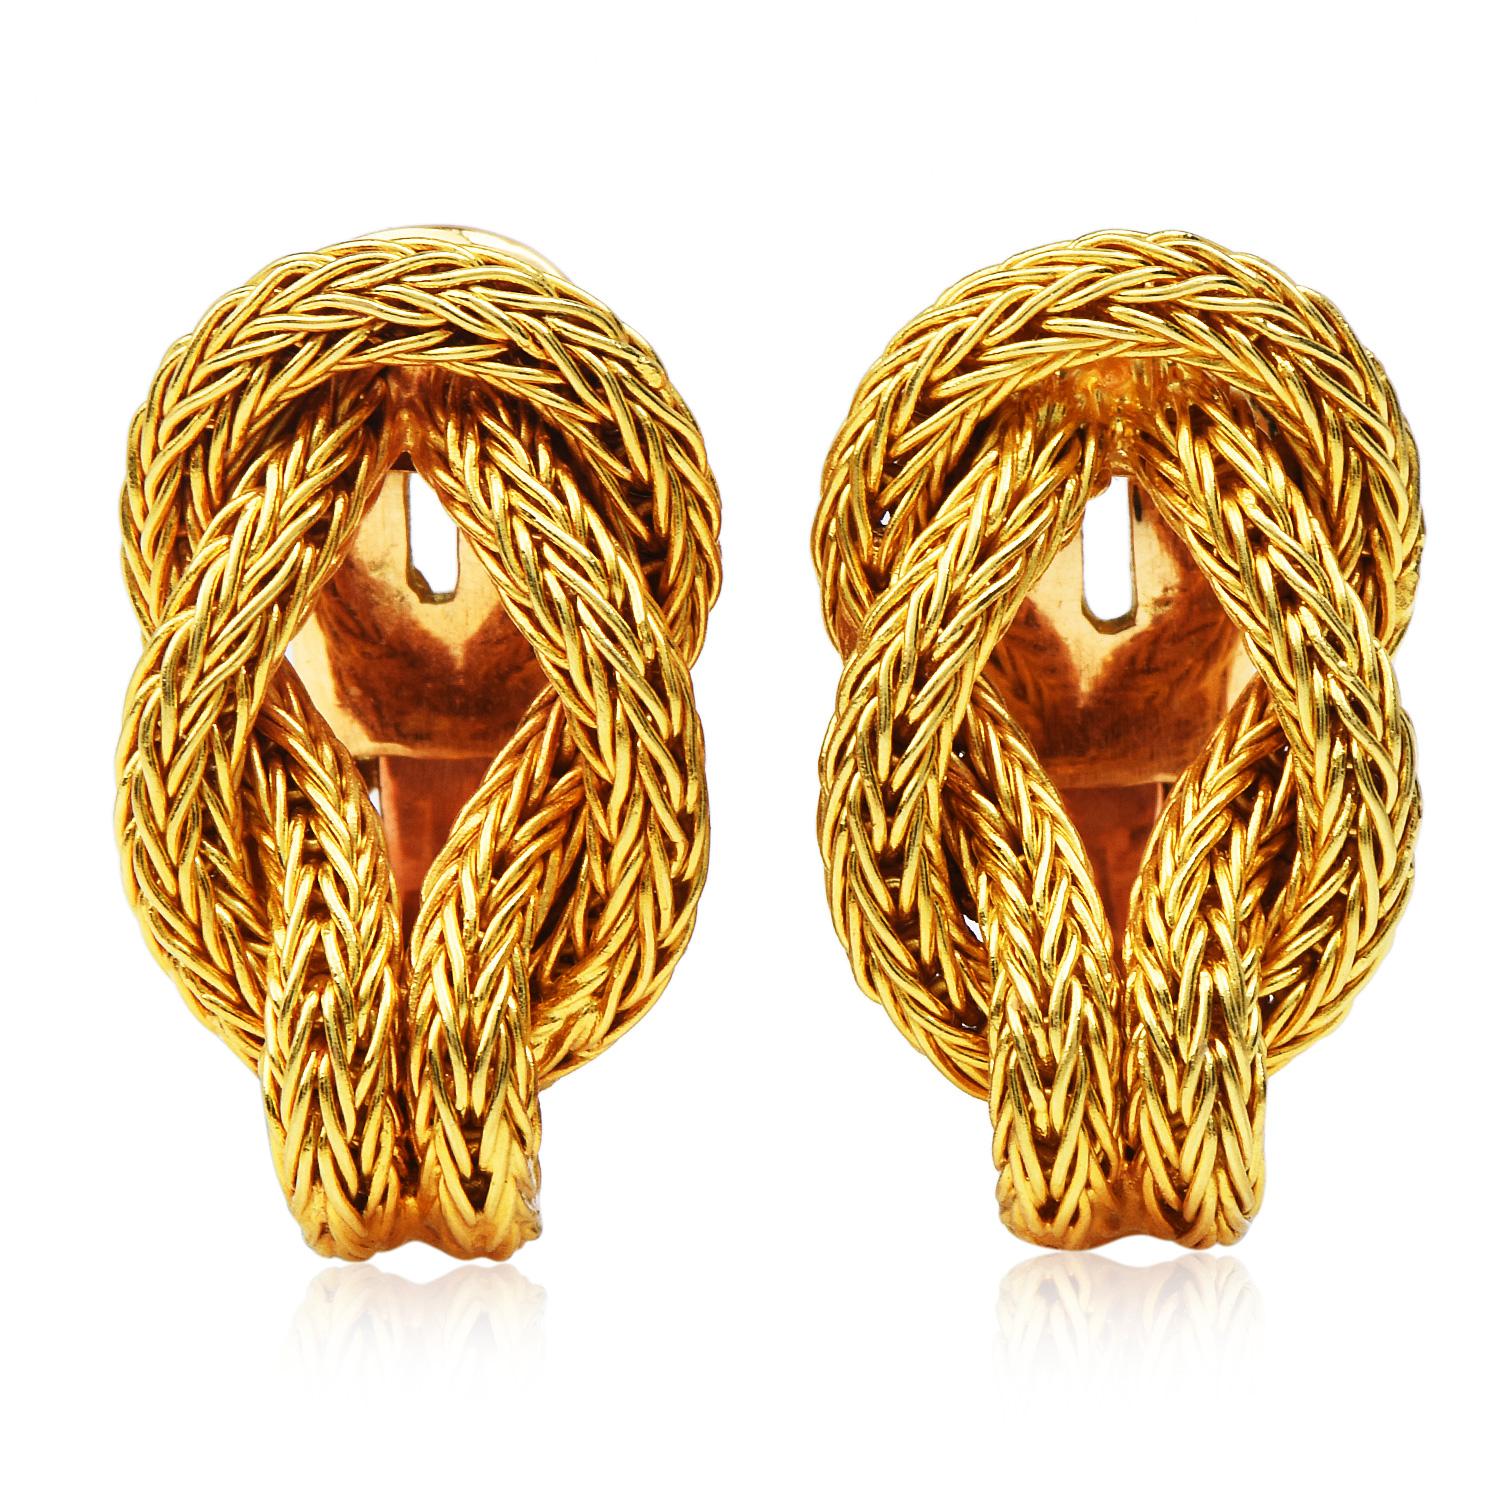 From the recognized designer Ilias Lalaounis.

Crafted in solid 18K Yellow Gold, these exquisite Hercules Knot motifs symbolize the strength and durability of love. 

the earrings have been finished with clip backs so they can be worn by those with